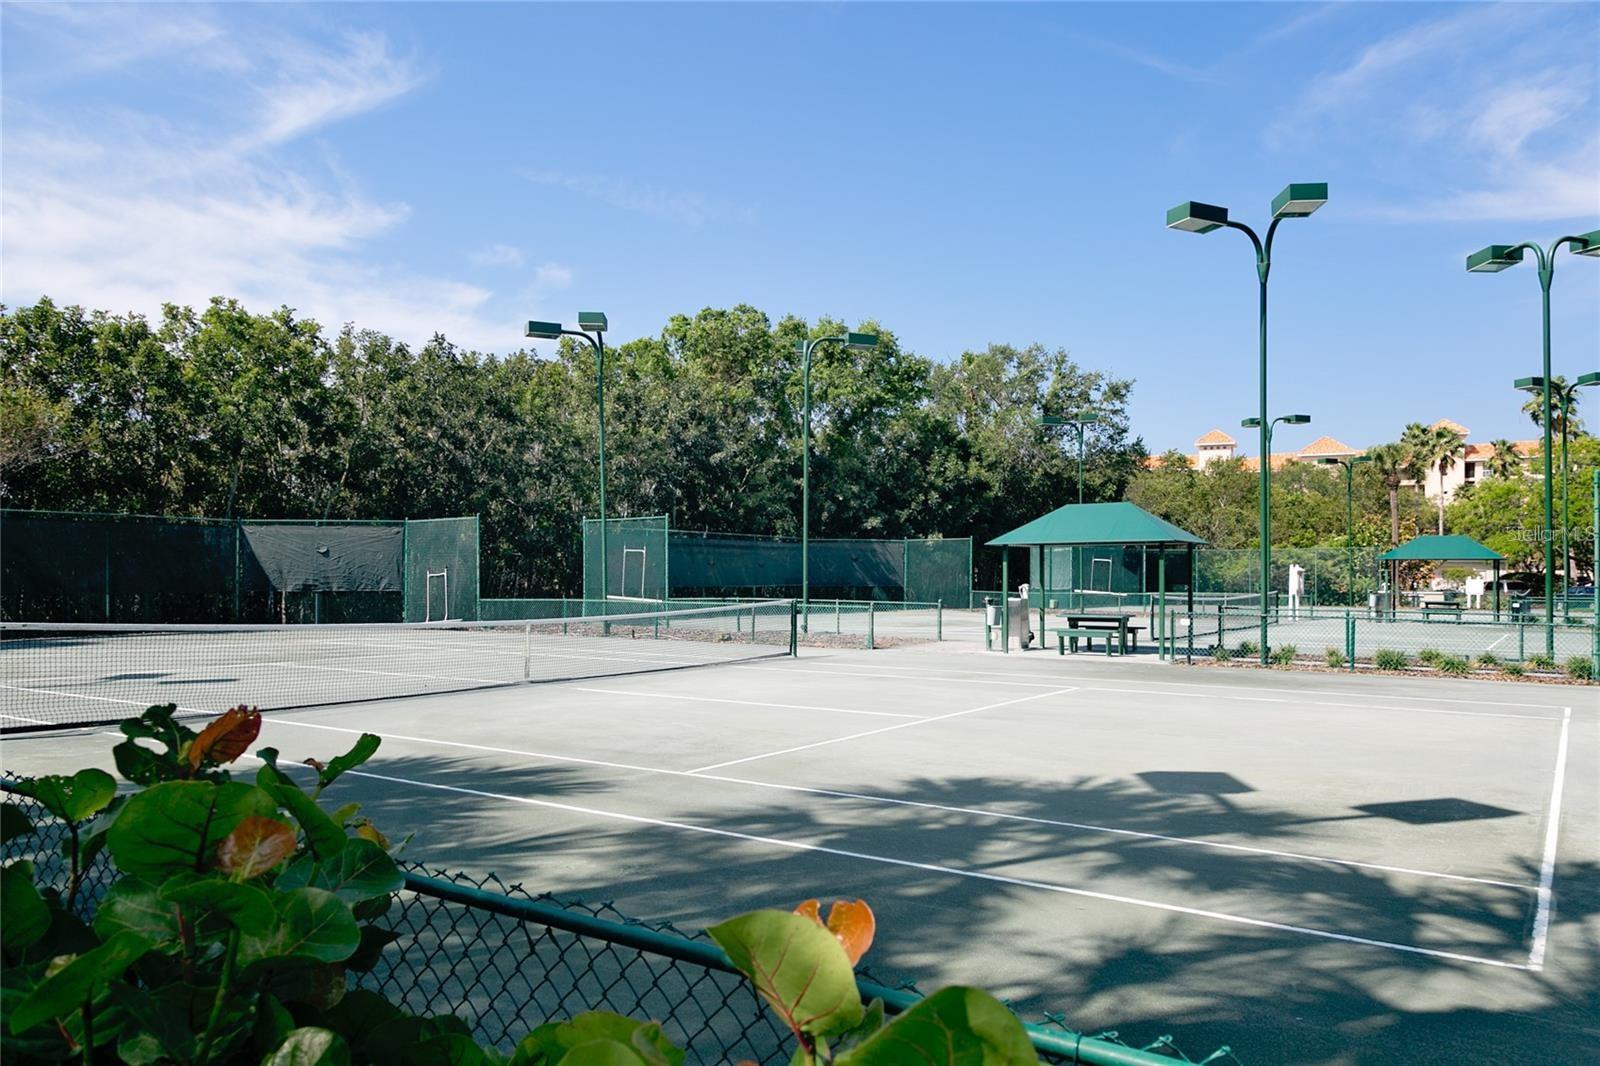 Tennis anyone? Lighted har-tru tennis courts. Car wash setup and e-car battery charging station next to the courts.